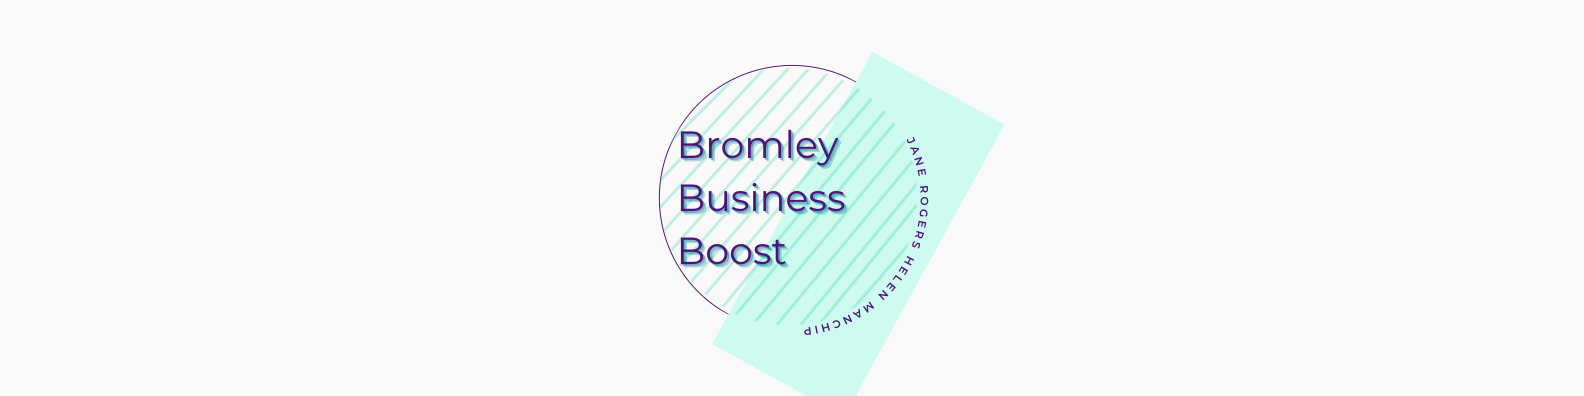 Bromley Business Boost